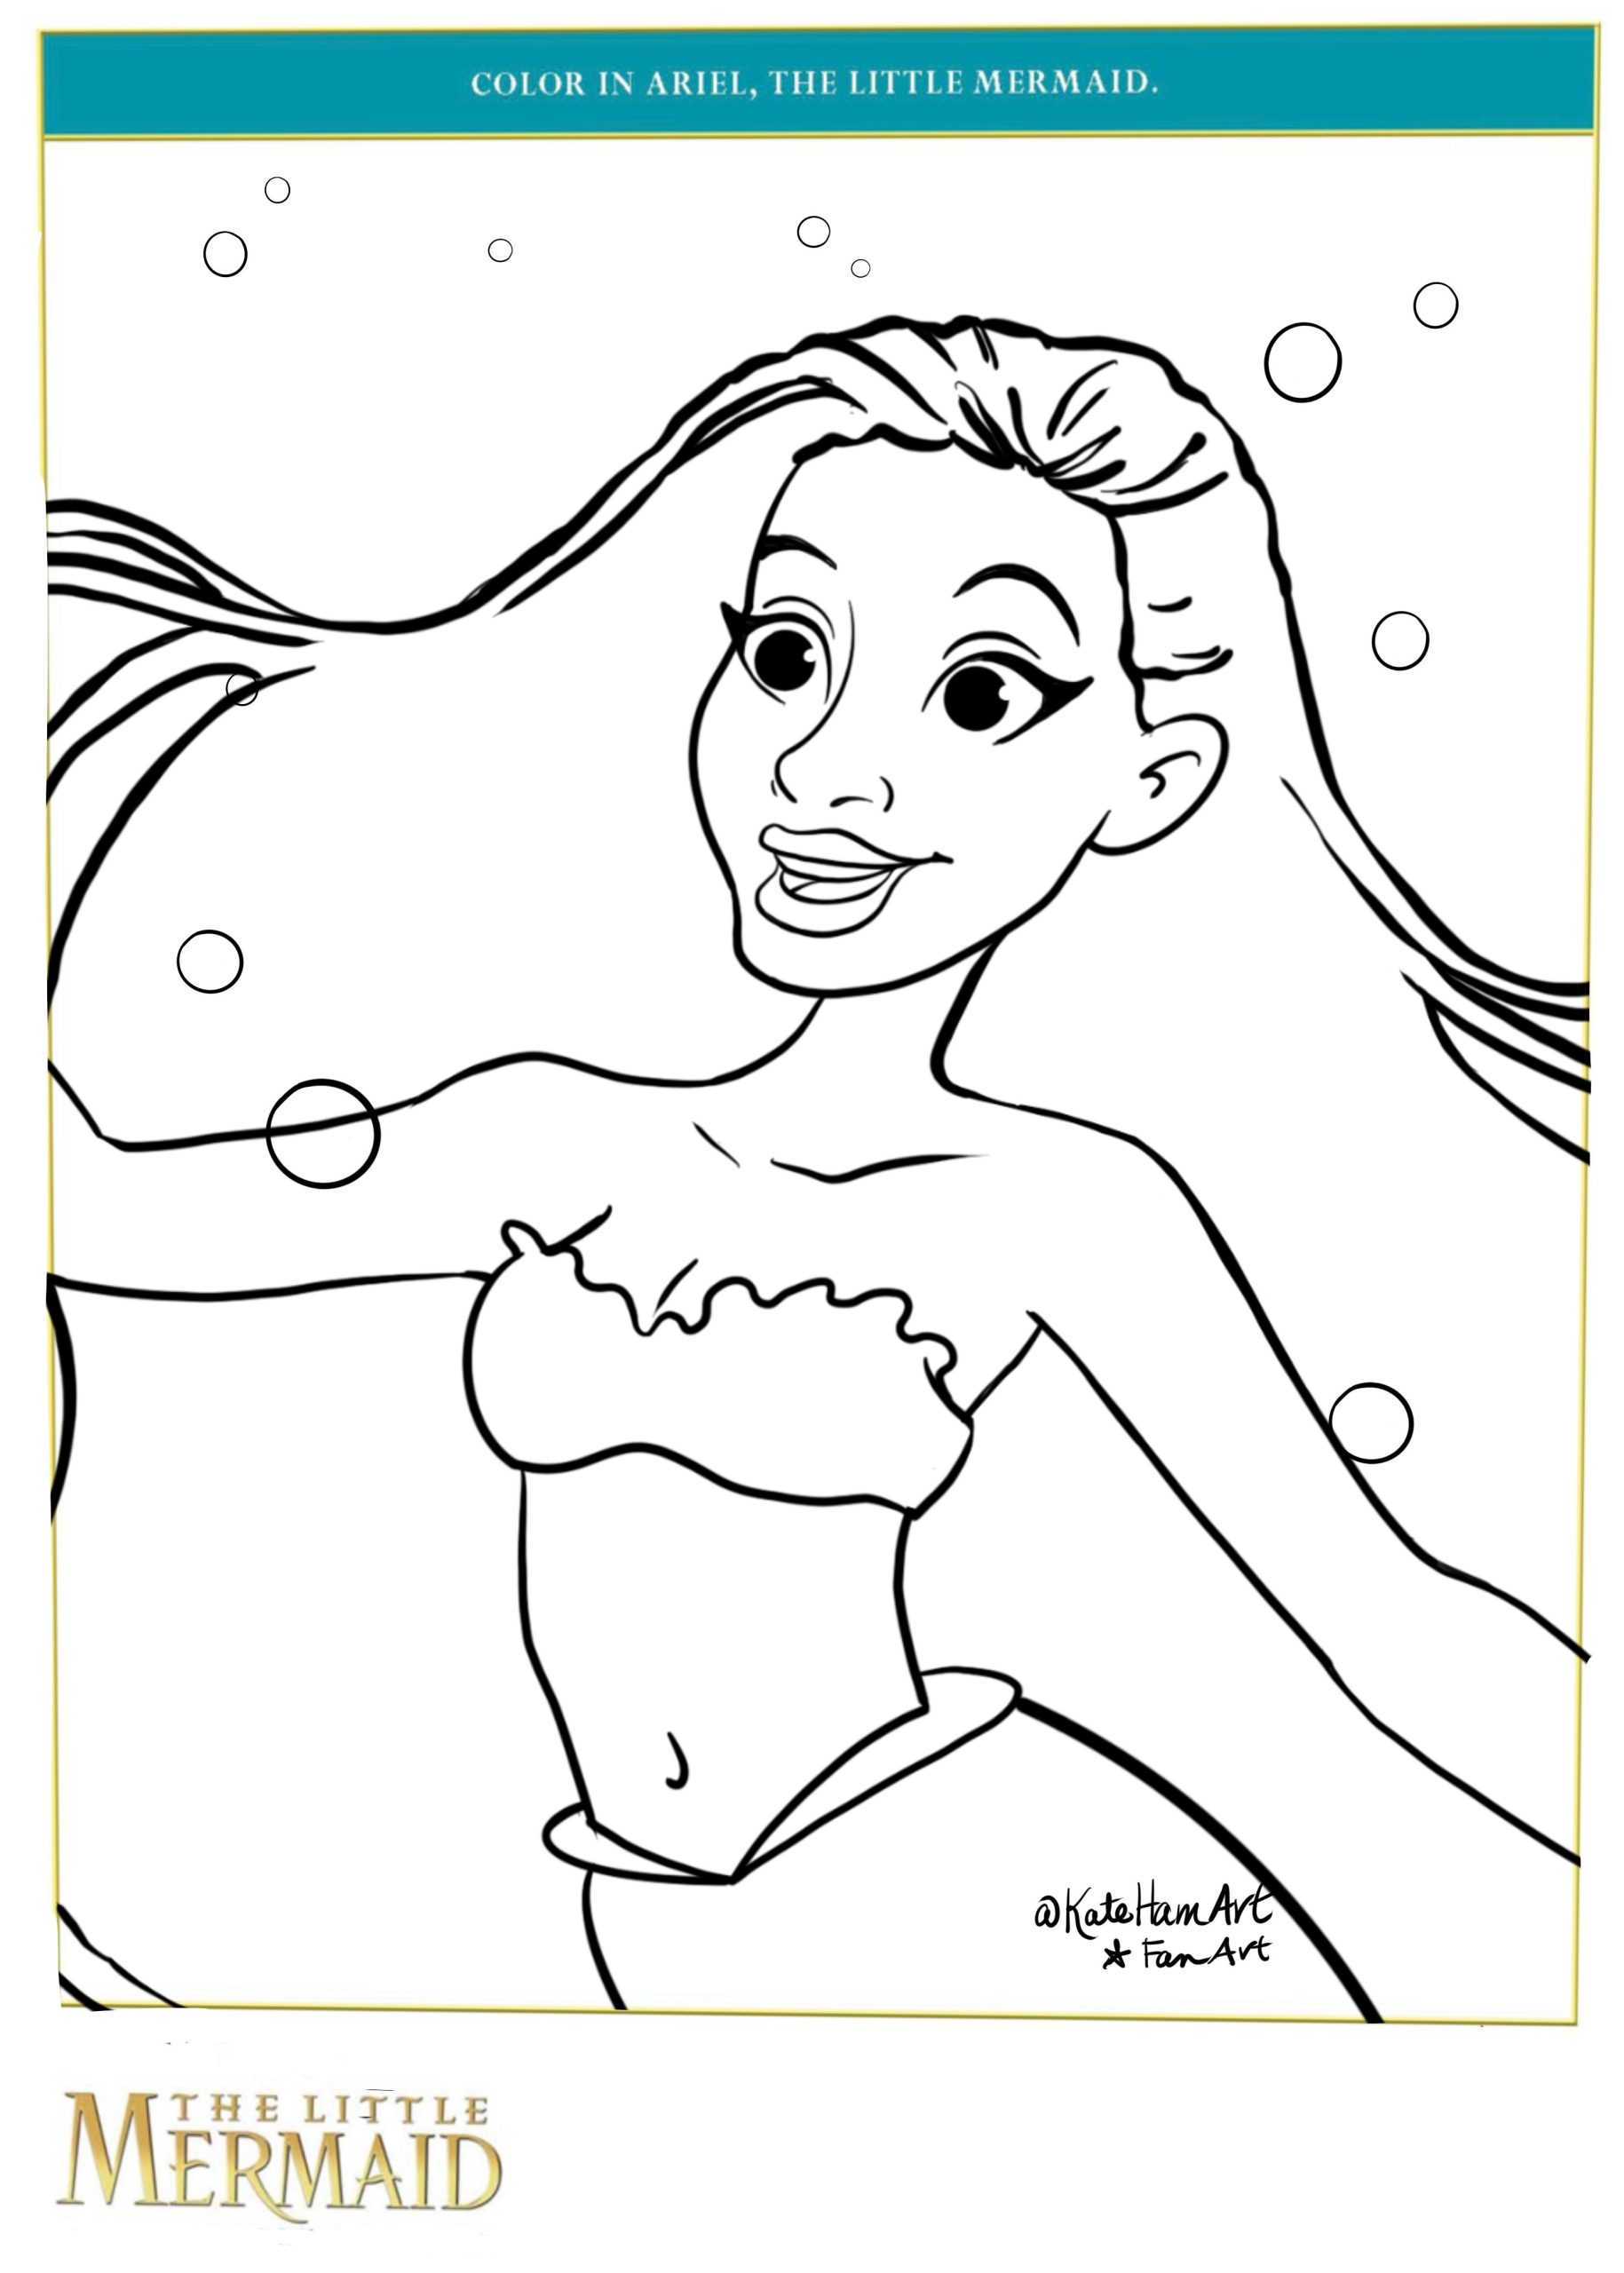 the little mermaid title black and white